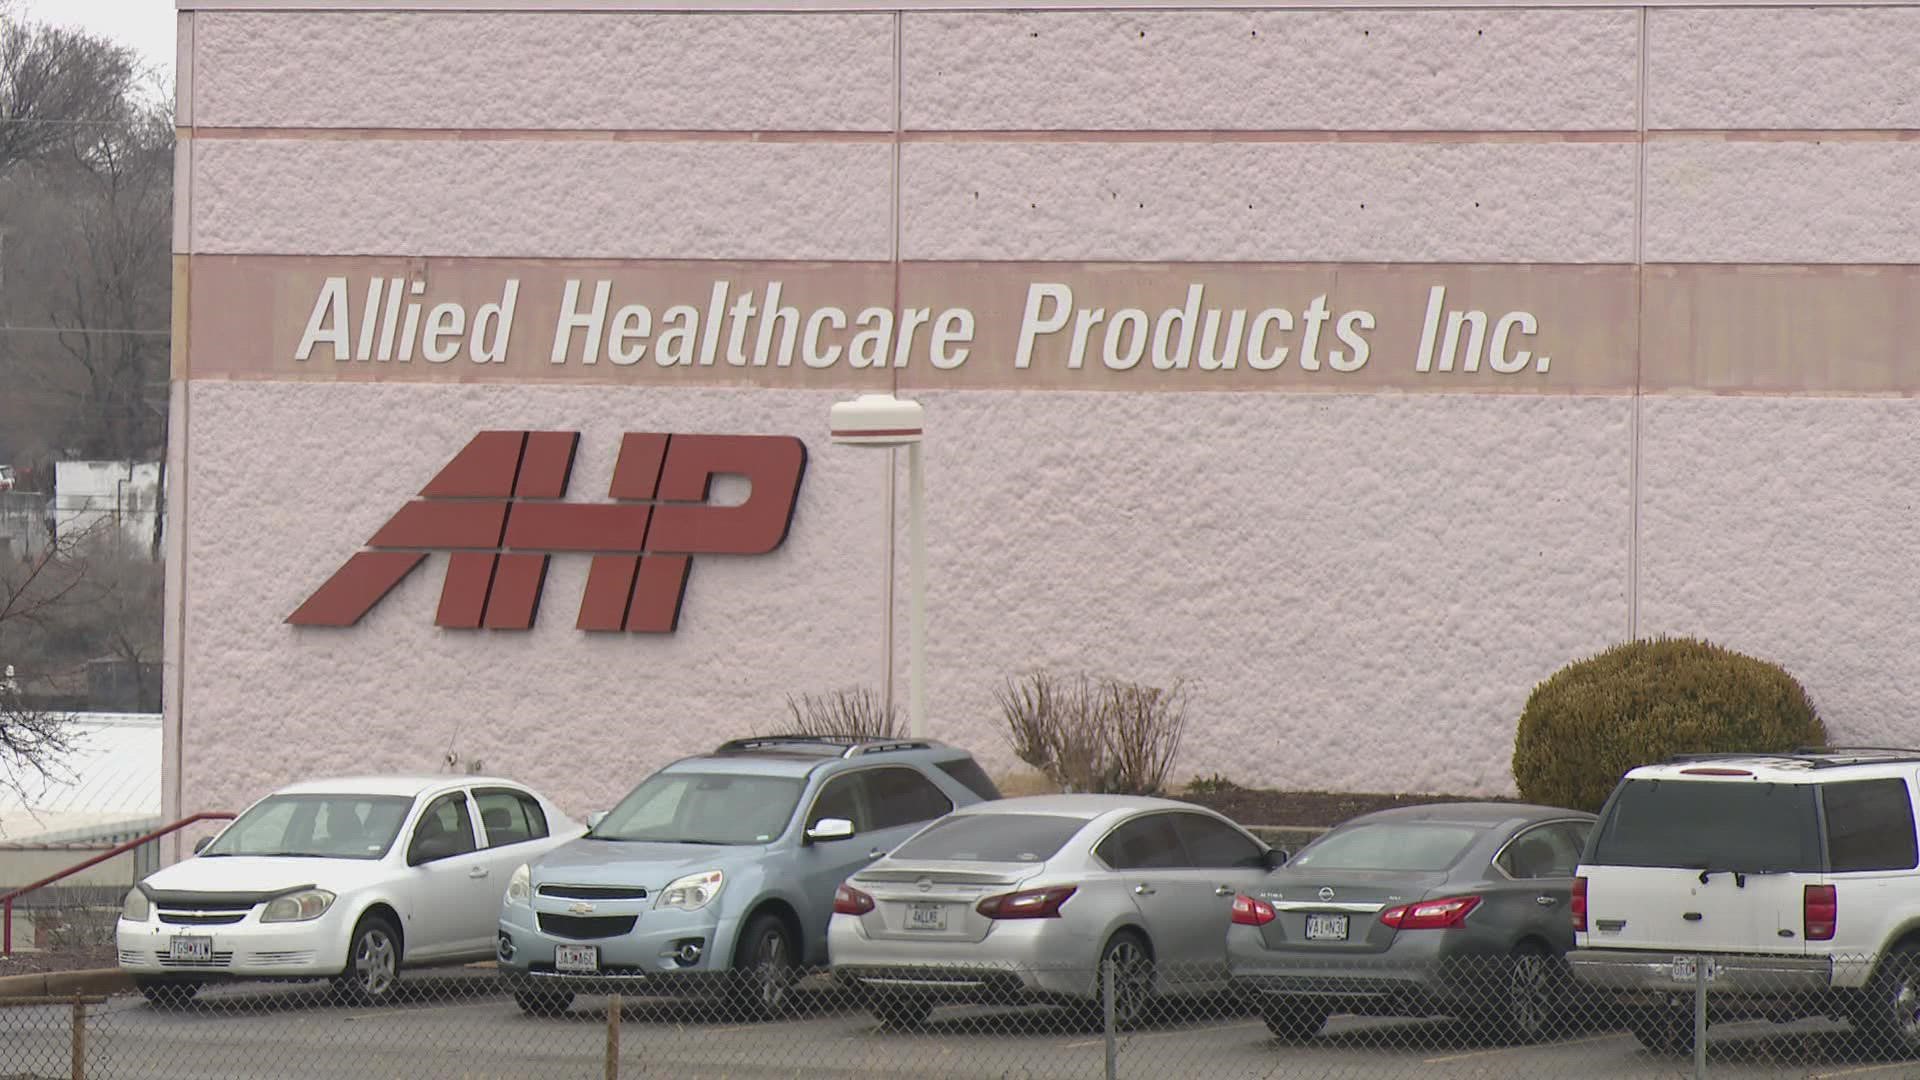 Allied Healthcare Products Inc. said it would close its plant on The Hill and lay off workers starting in February.